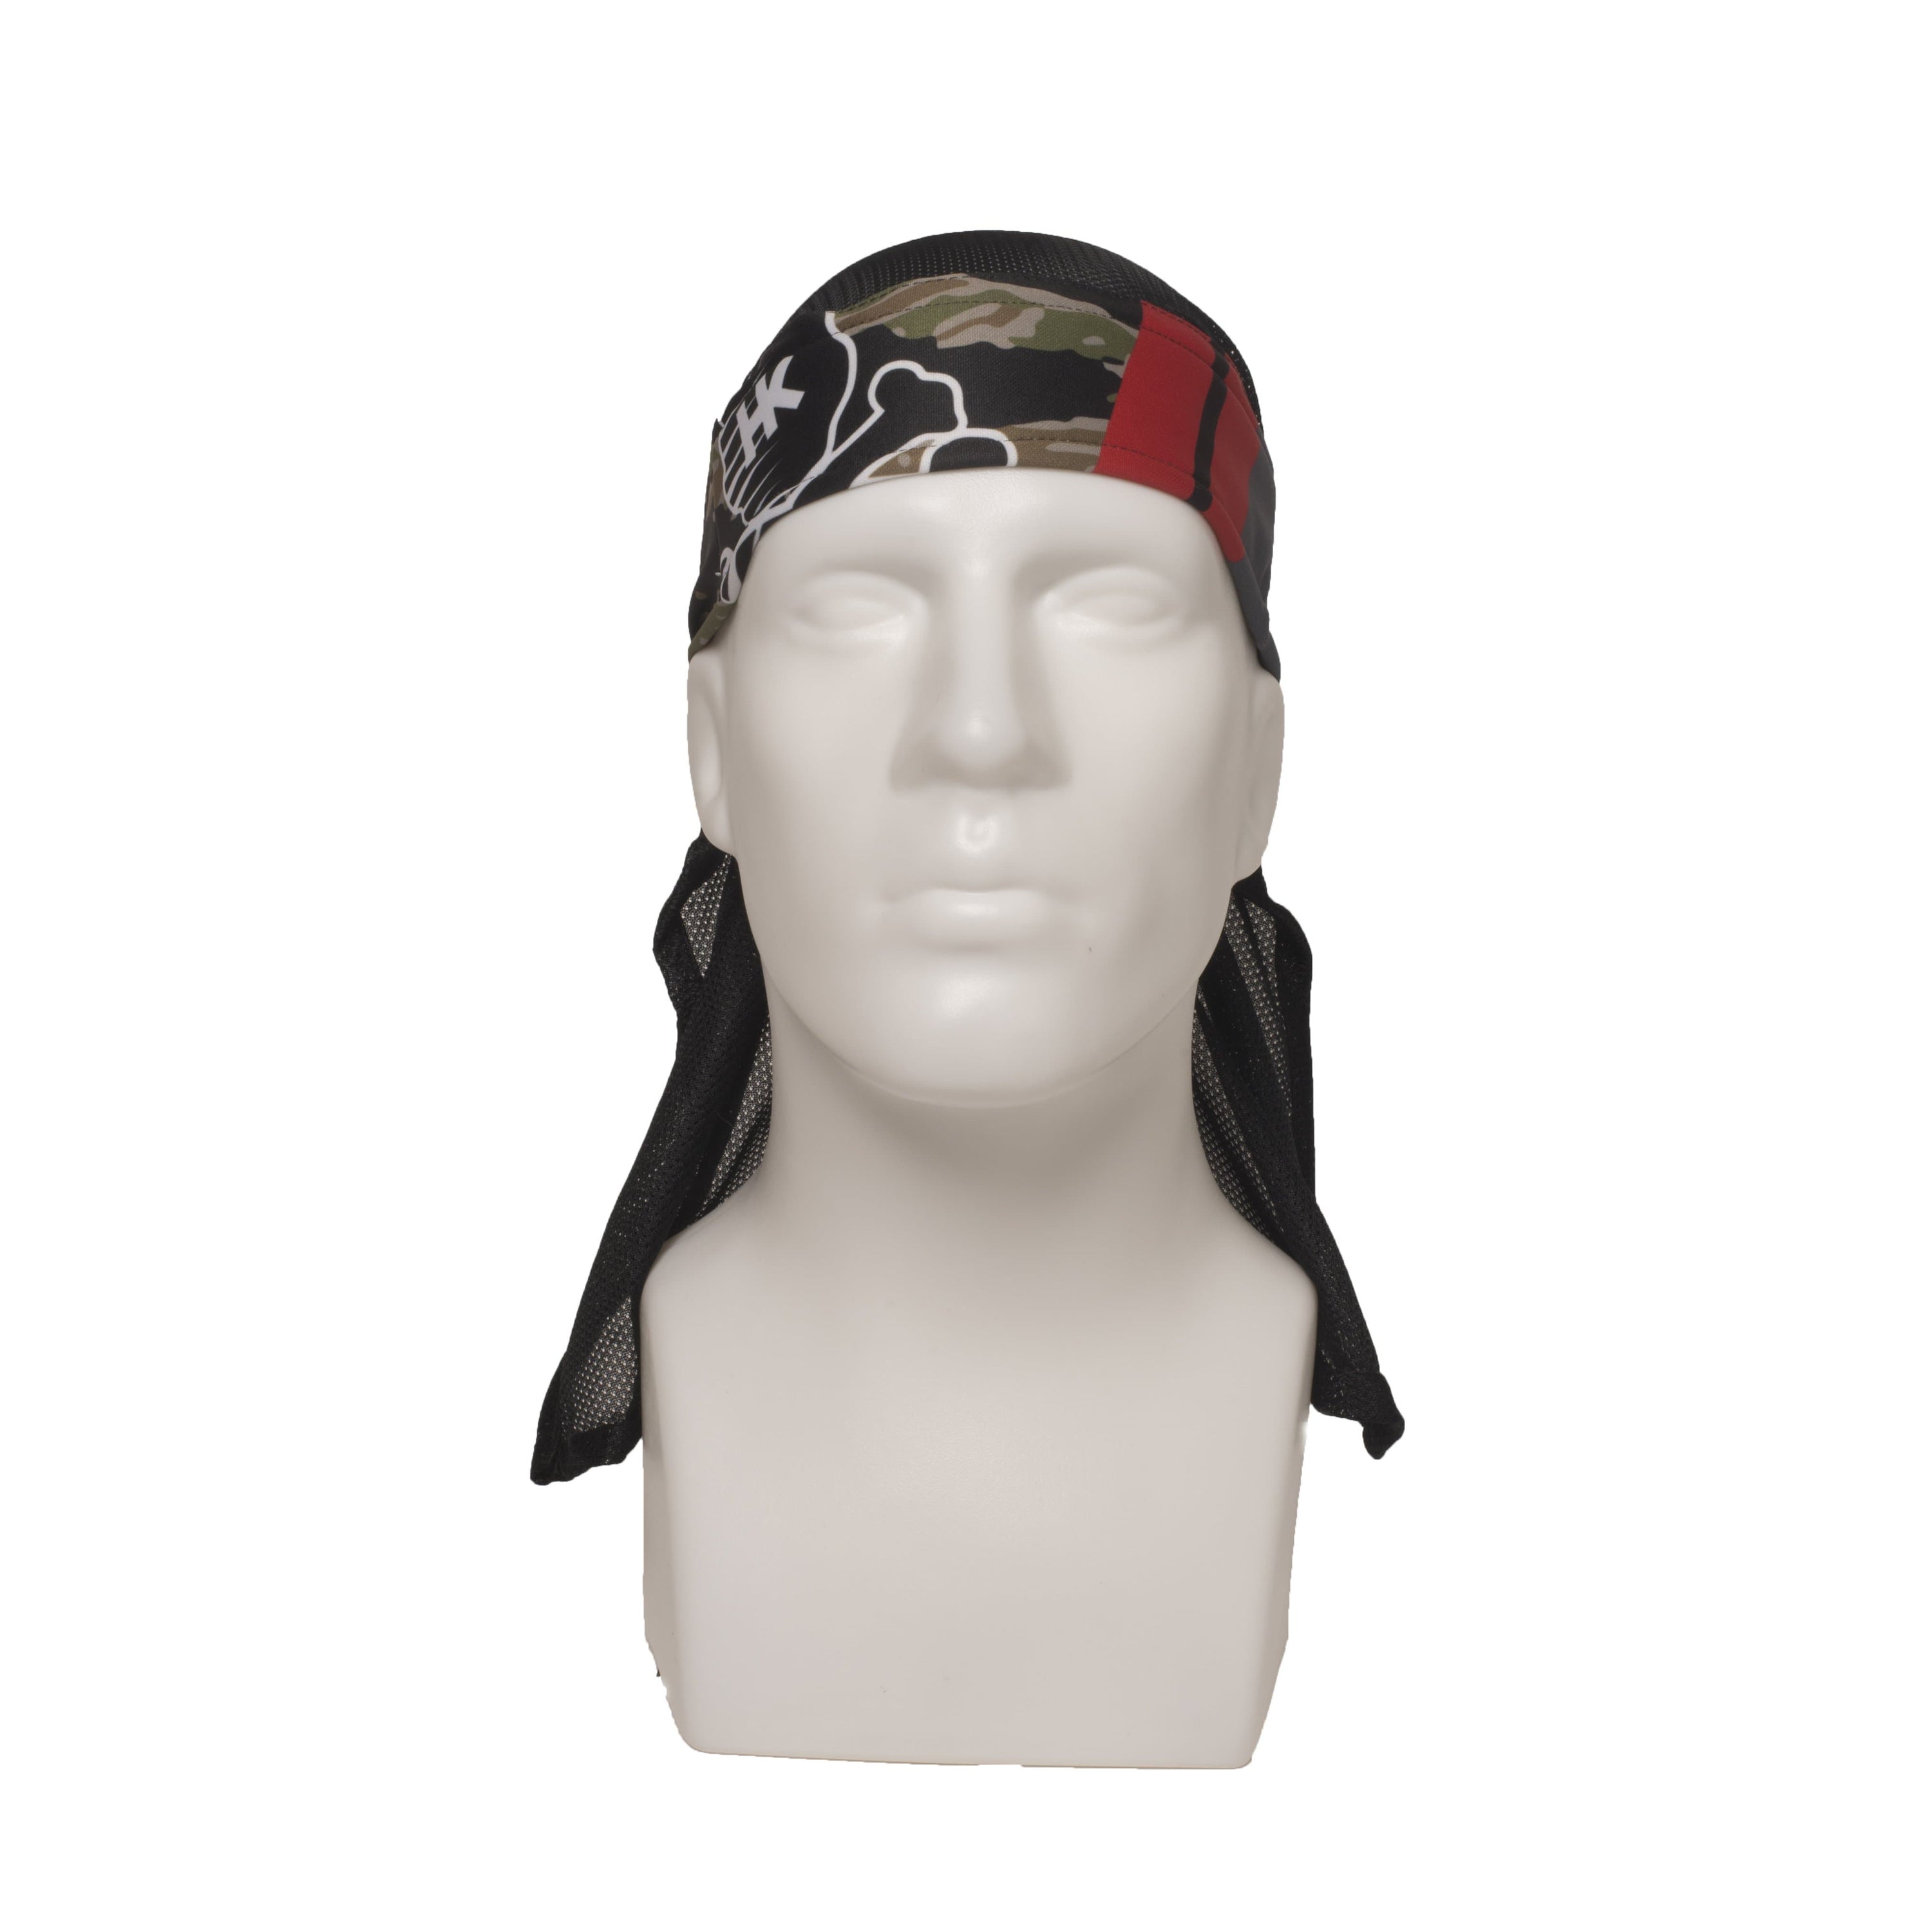 MR. H Slayer Woodland Headwrap - Eminent Paintball And Airsoft